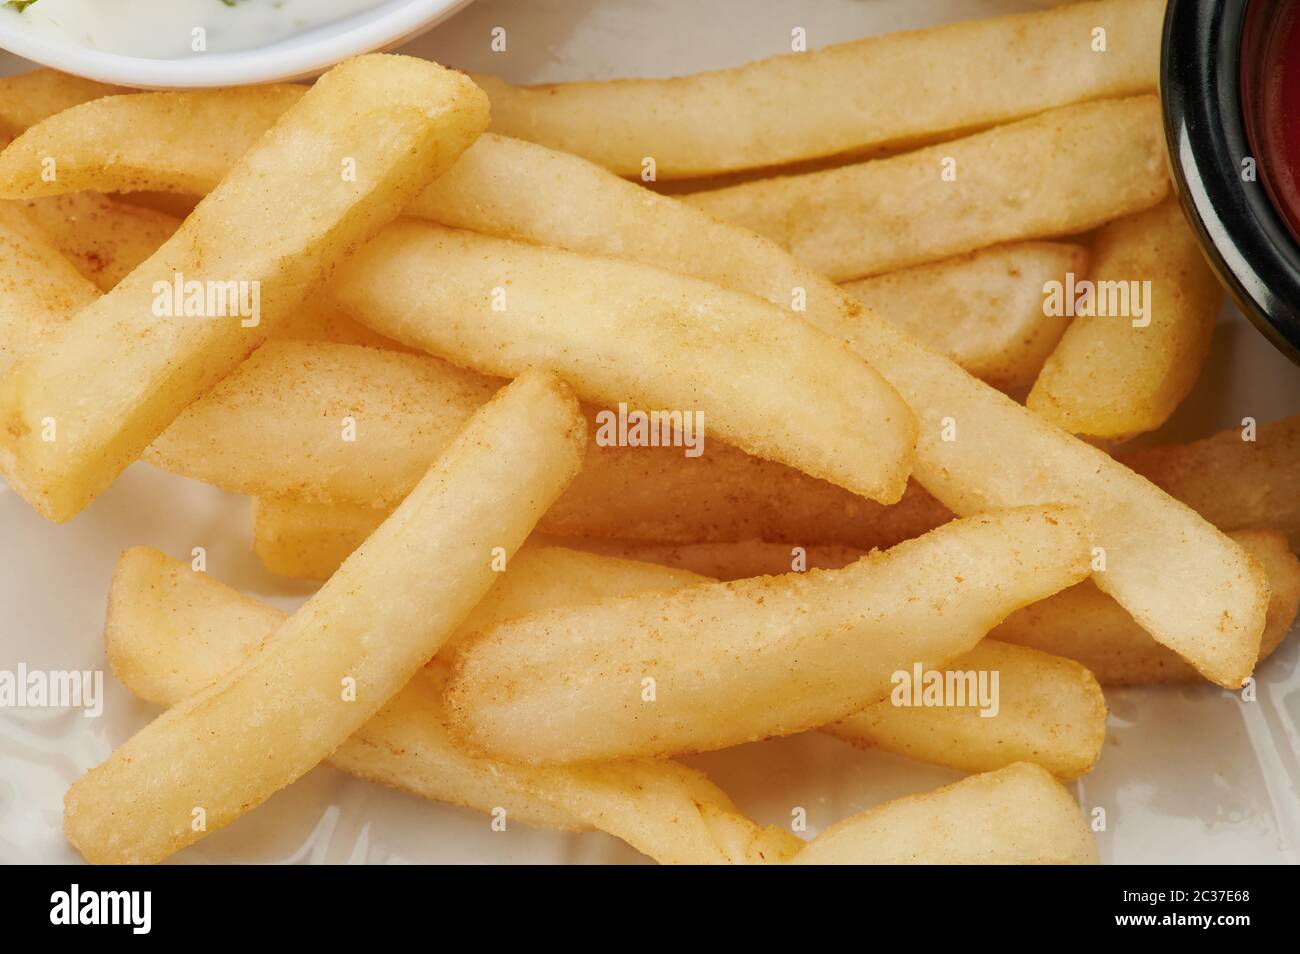 Delicious french fries macro close up view. Unhealthy fastfood theme Stock Photo